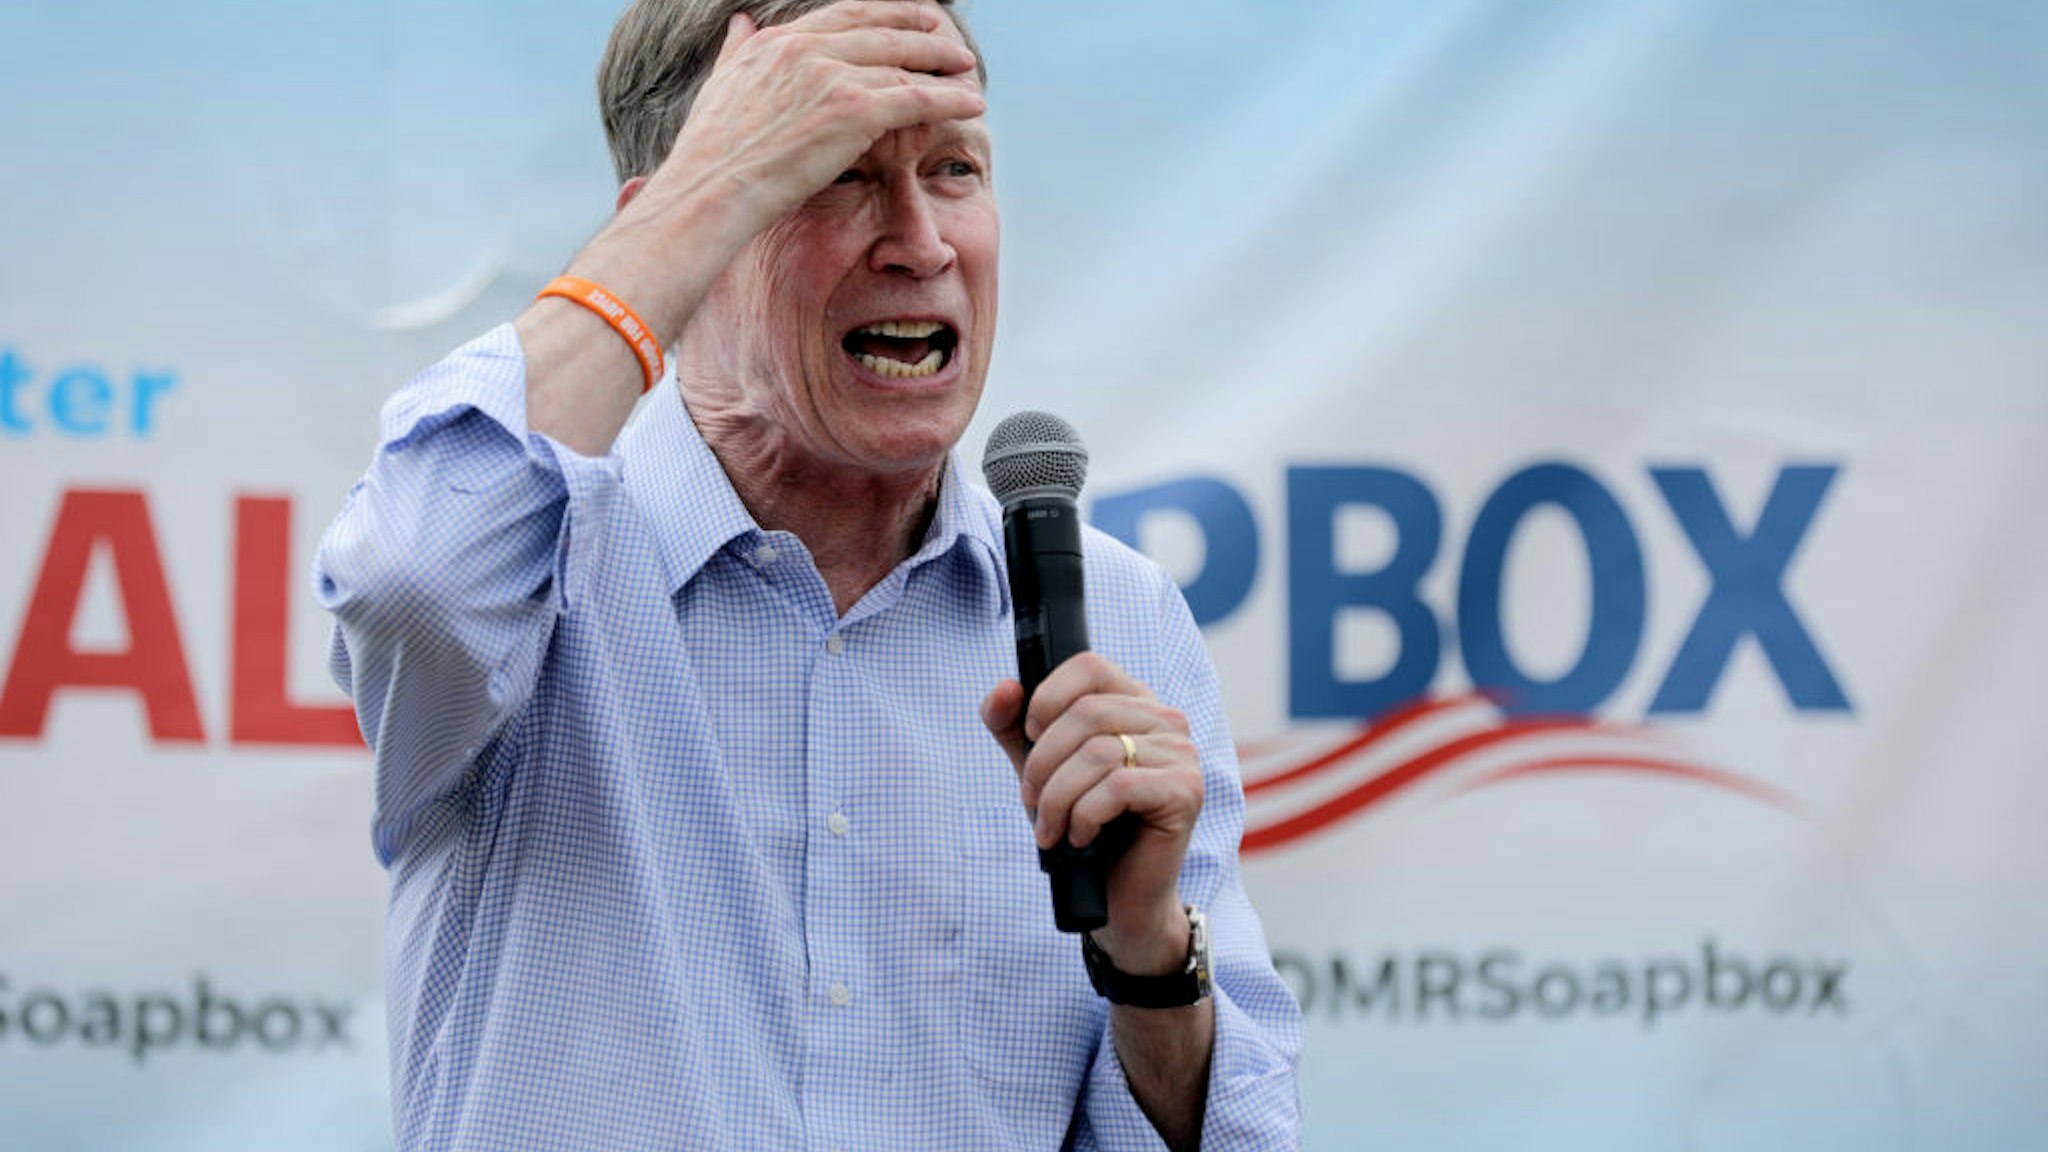 Democratic presidential candidate and former Colorado Governor John Hickenlooper delivers a 20-minute campaign speech at the Des Moines Register Political Soapbox at the Iowa State Fair August 10, 2019 in Des Moines, Iowa.